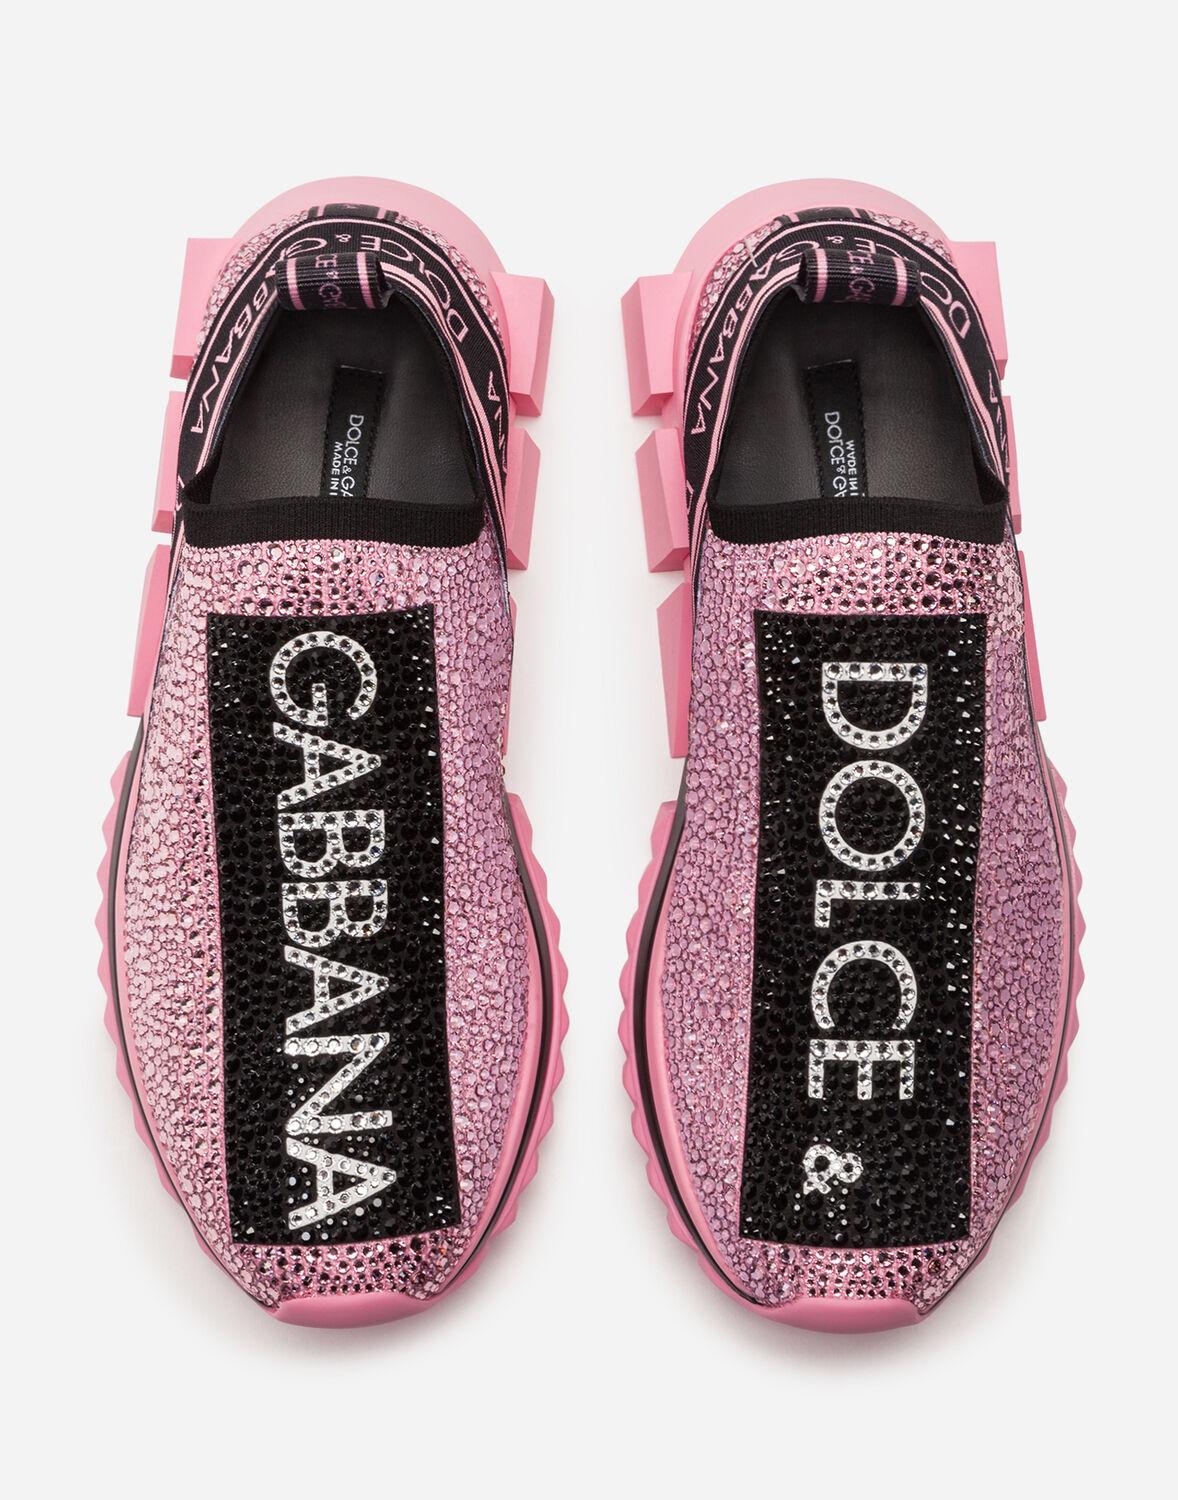 dolce and gabbana pink shoes